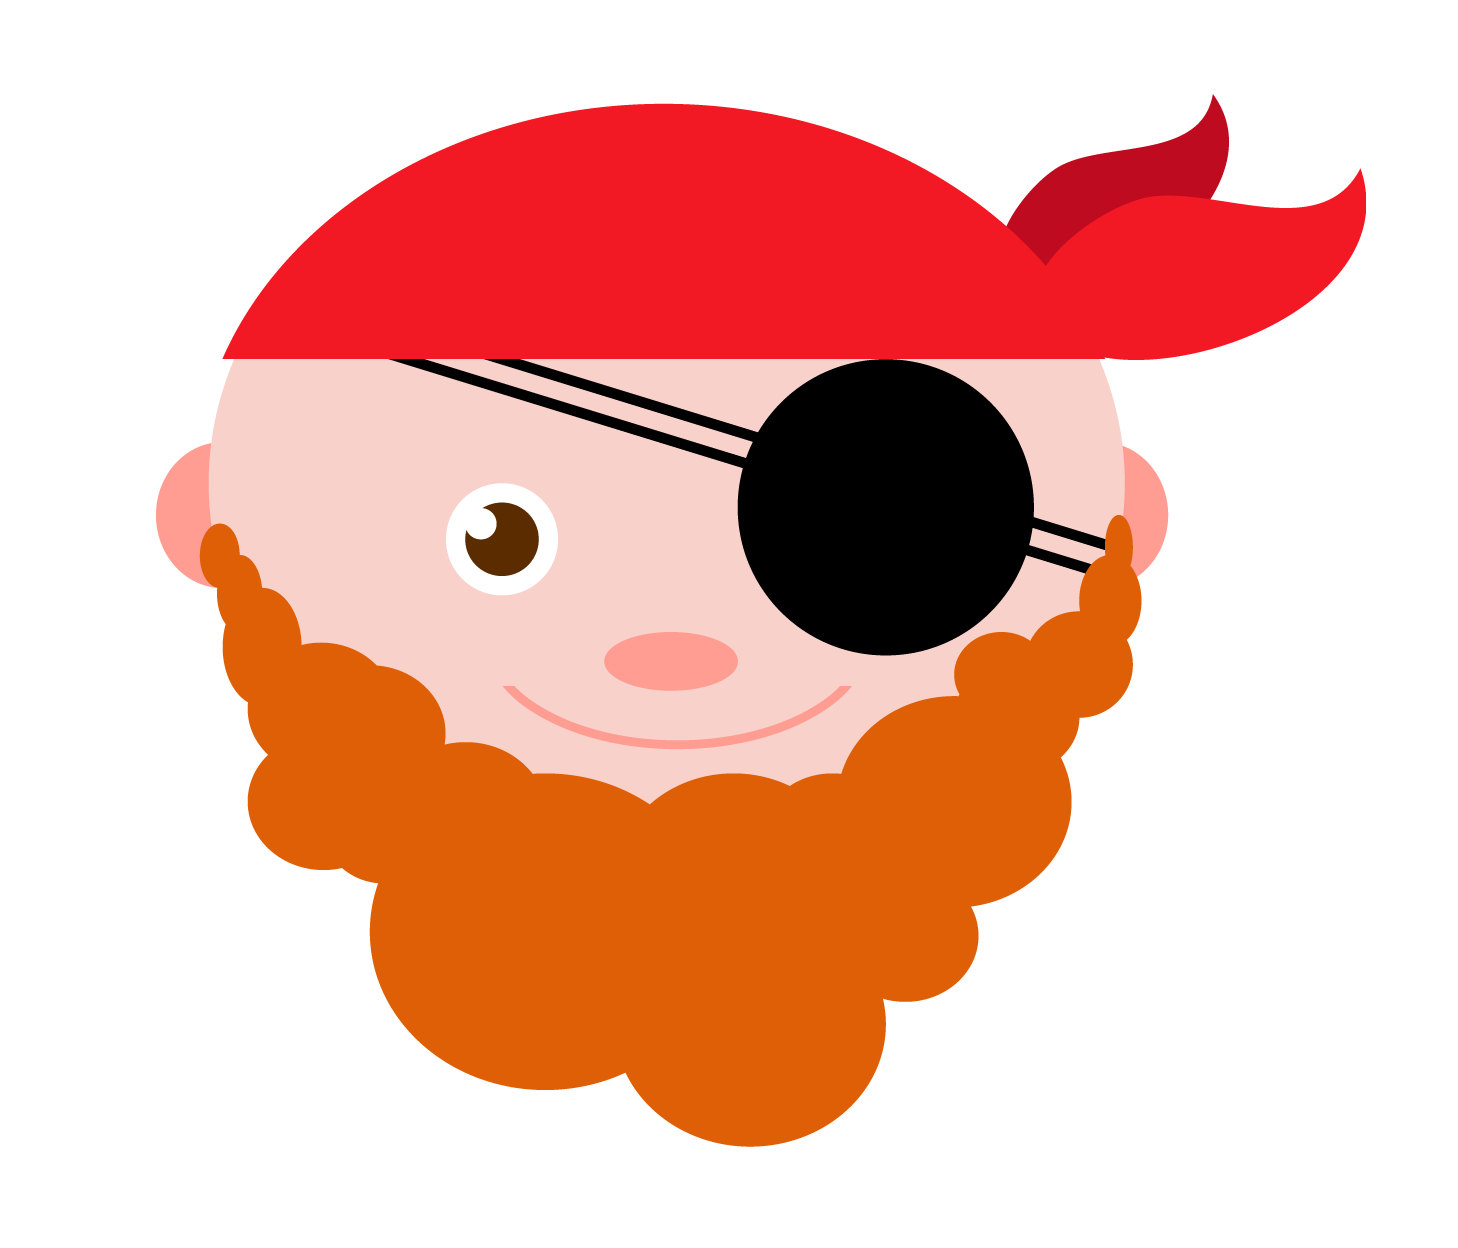 Eye-patch svg #16, Download drawings